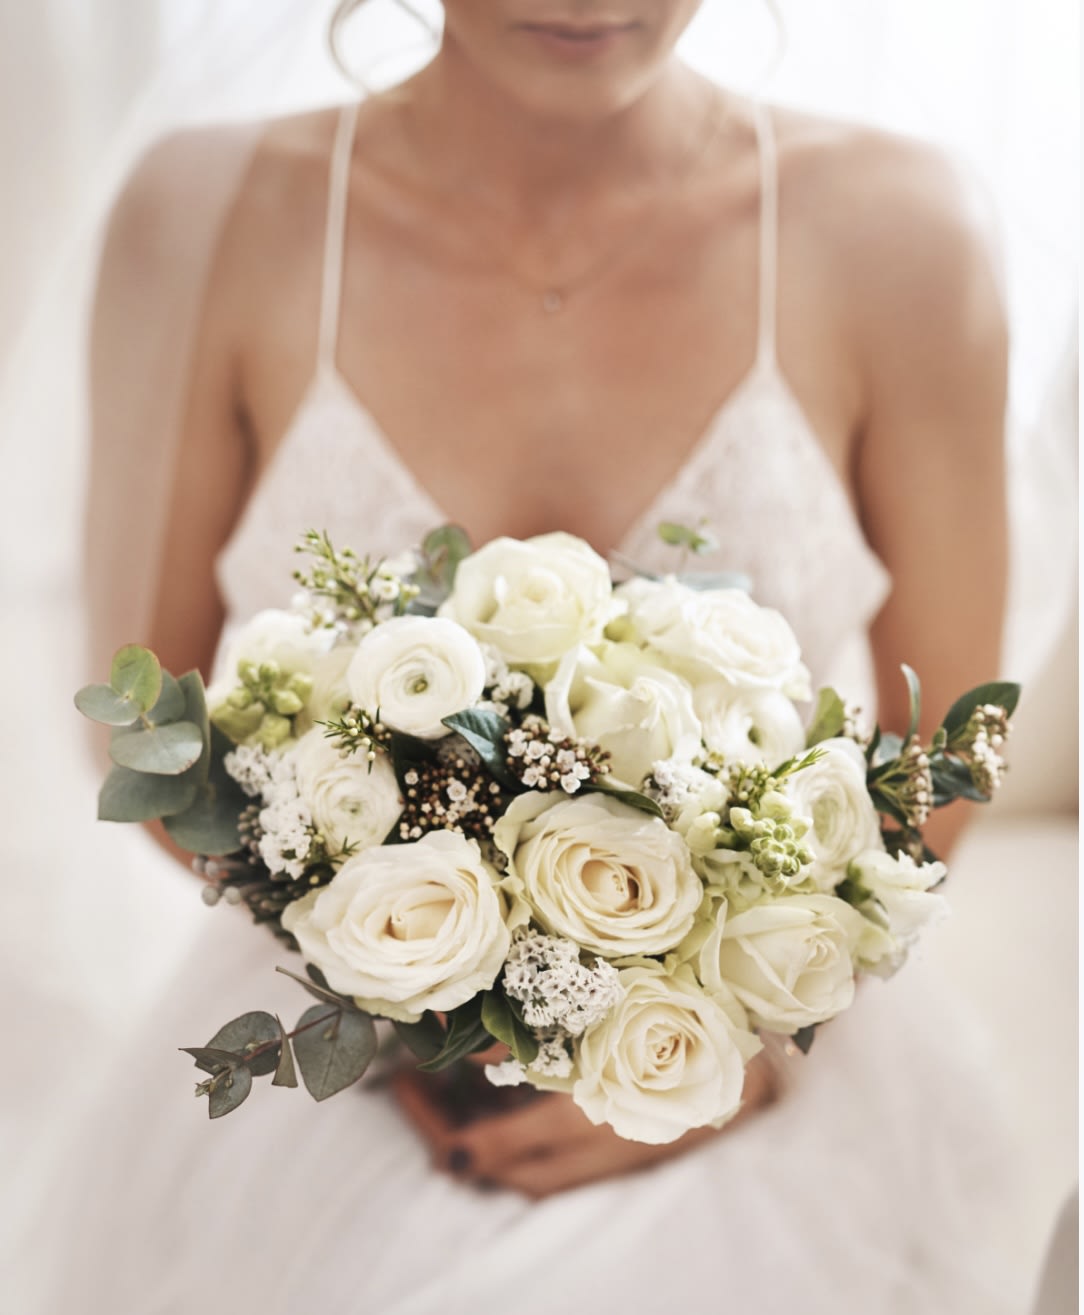 Rose &amp; Ranunculus bouquet  - This elegant hand tied bouquet of roses, Ranunculus accented with greenery and fillers.